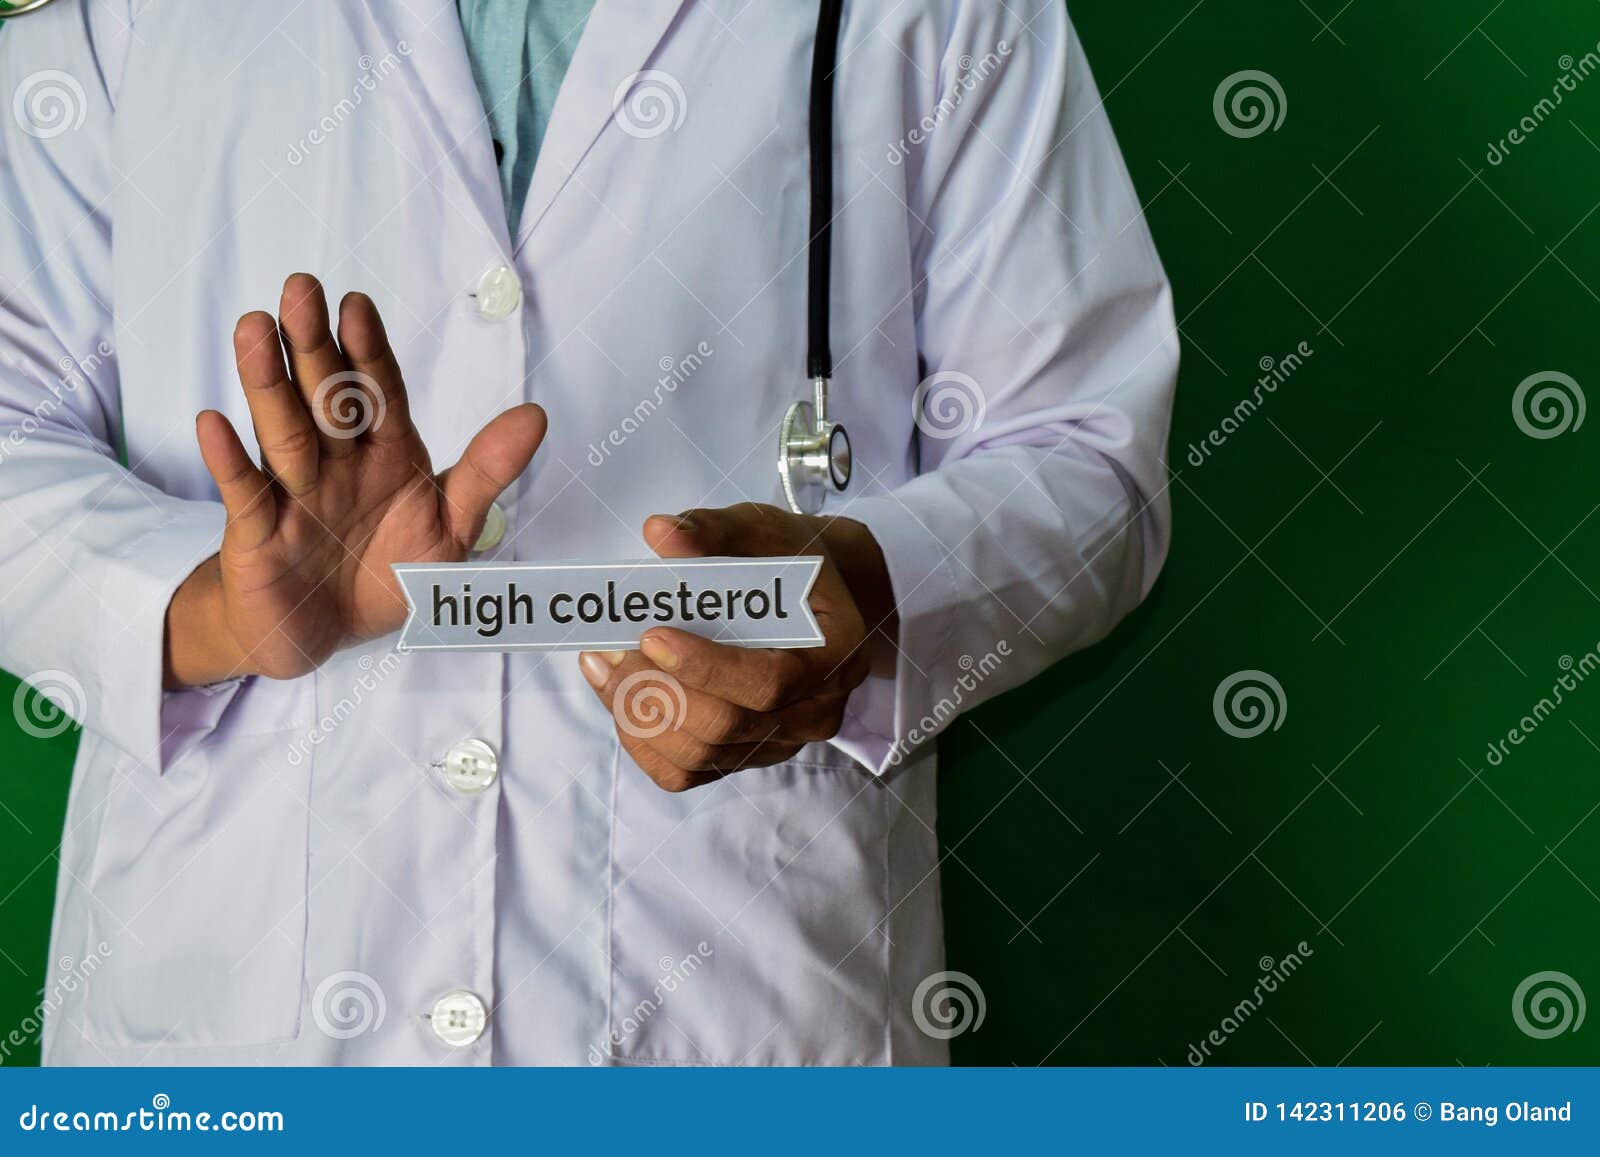 doctor standing on green background. selective focus in hand. high colesterol paper text. medical and healthcare concept